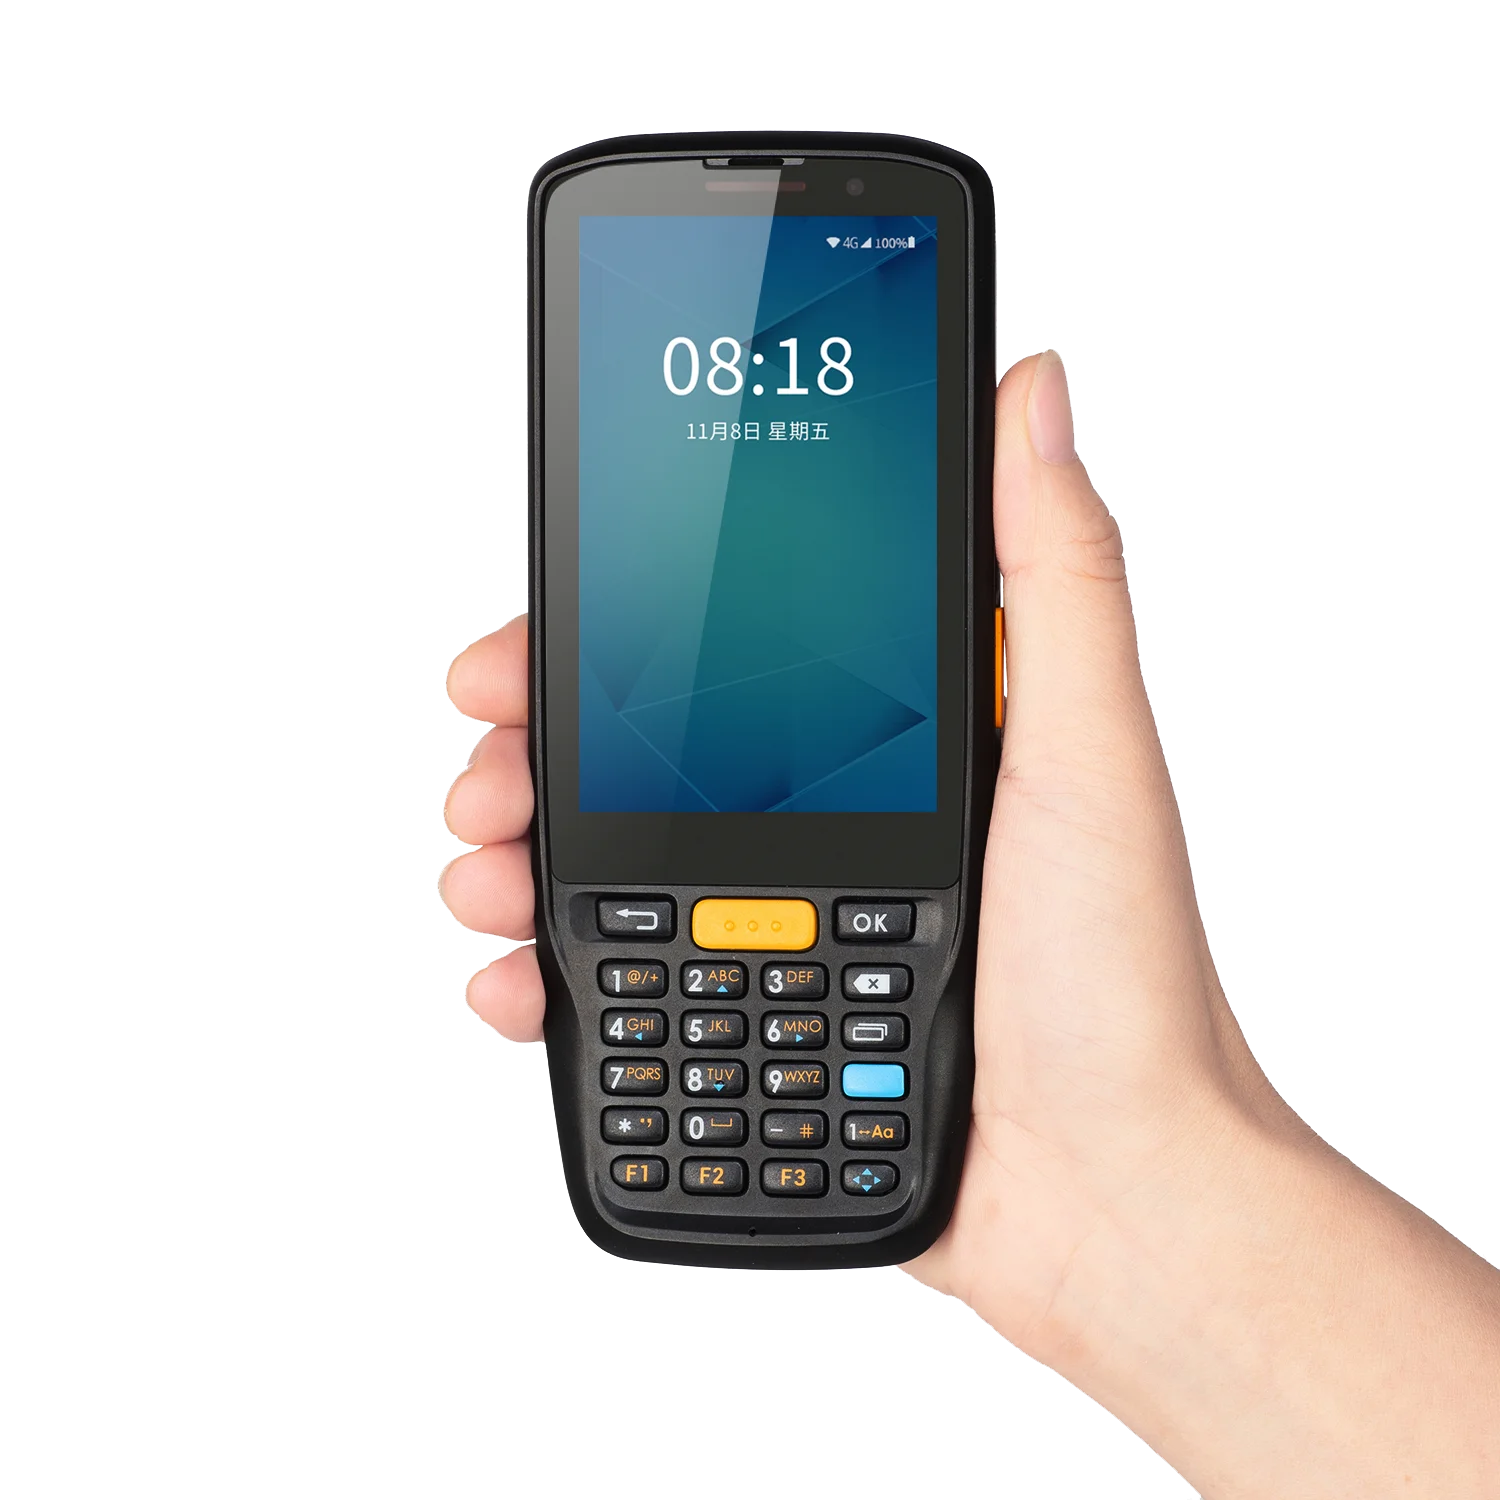 

Unime Factory UK1 Rugged Android Handheld Mobile Terminal Car Pda 1d 2d Qr Barcode Scanner With Ce Fcc Rohs Ccc Certificate Pdas